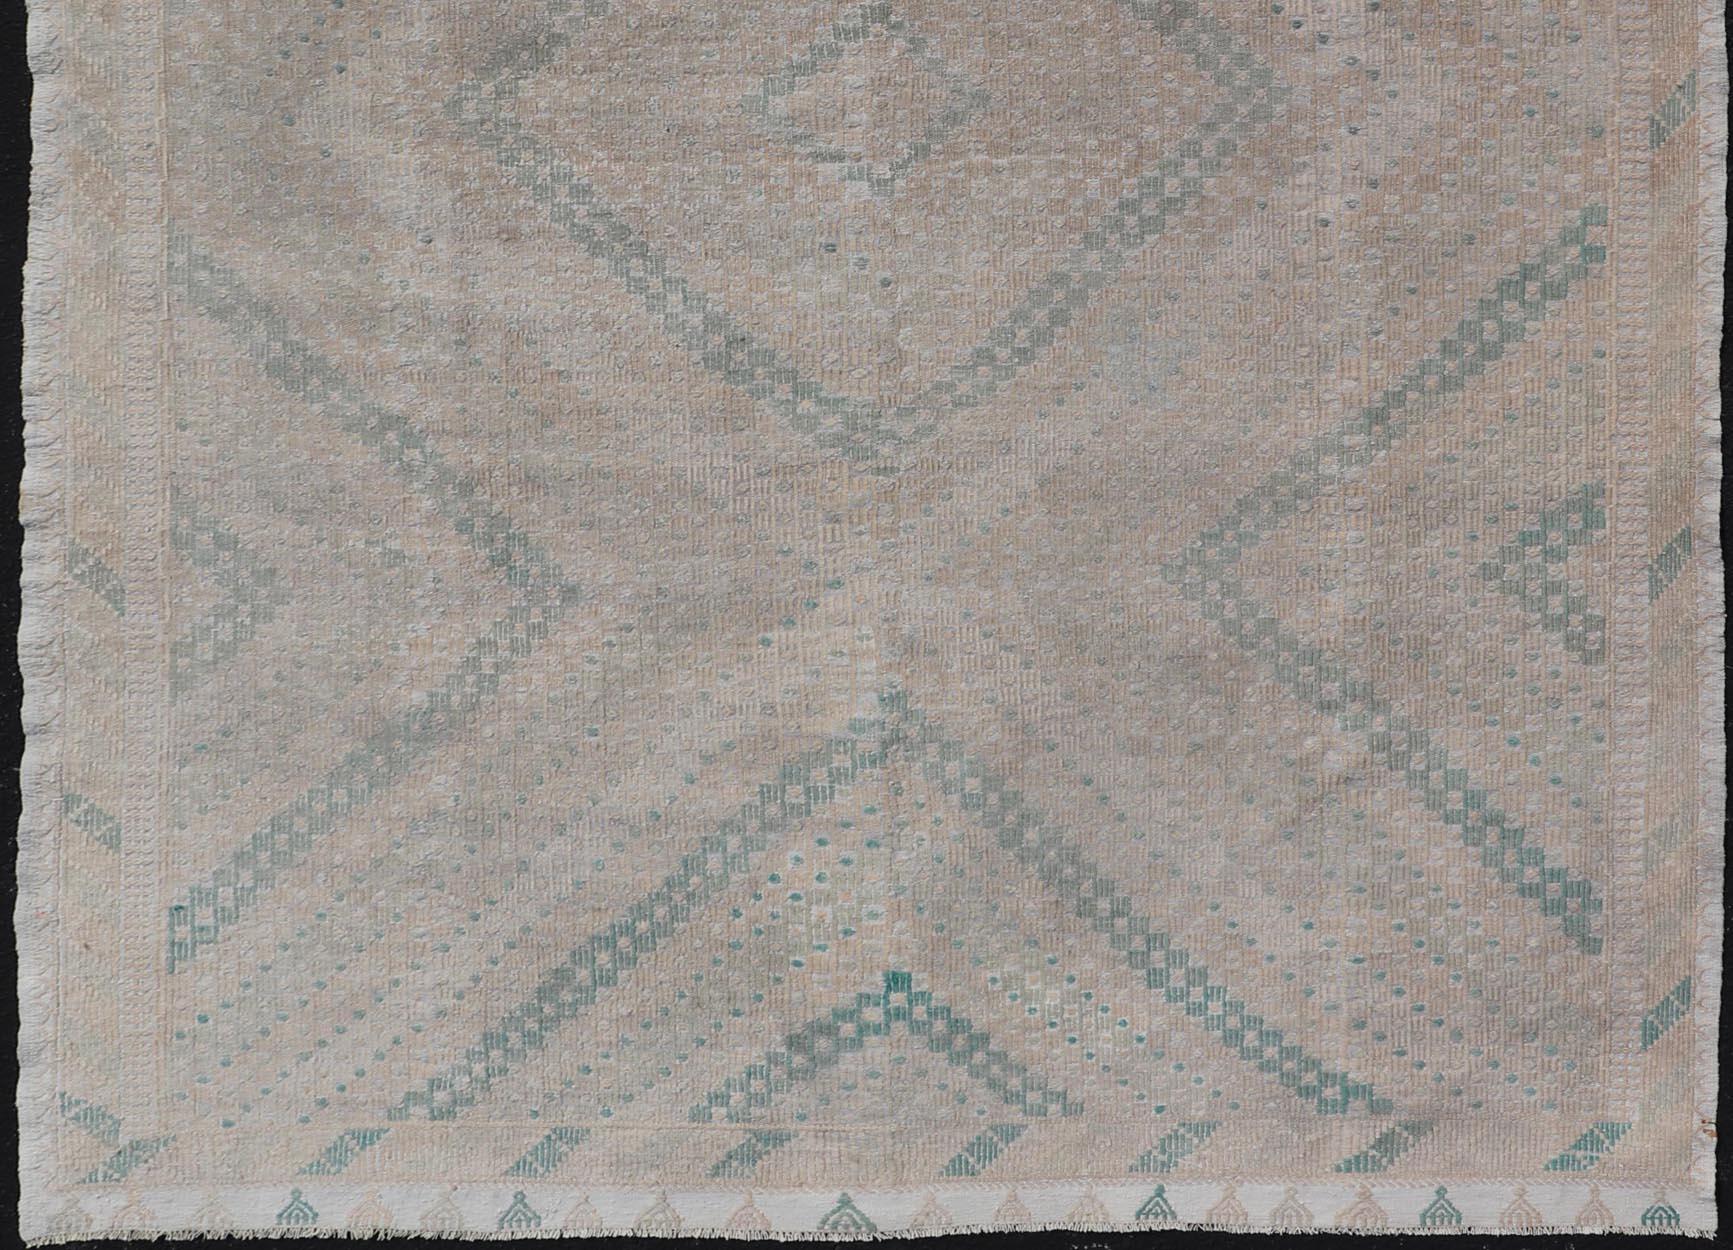 Hand-Woven Embroidered Vintage Hand Woven Turkish Kilim with Geometric Diamond Design  For Sale